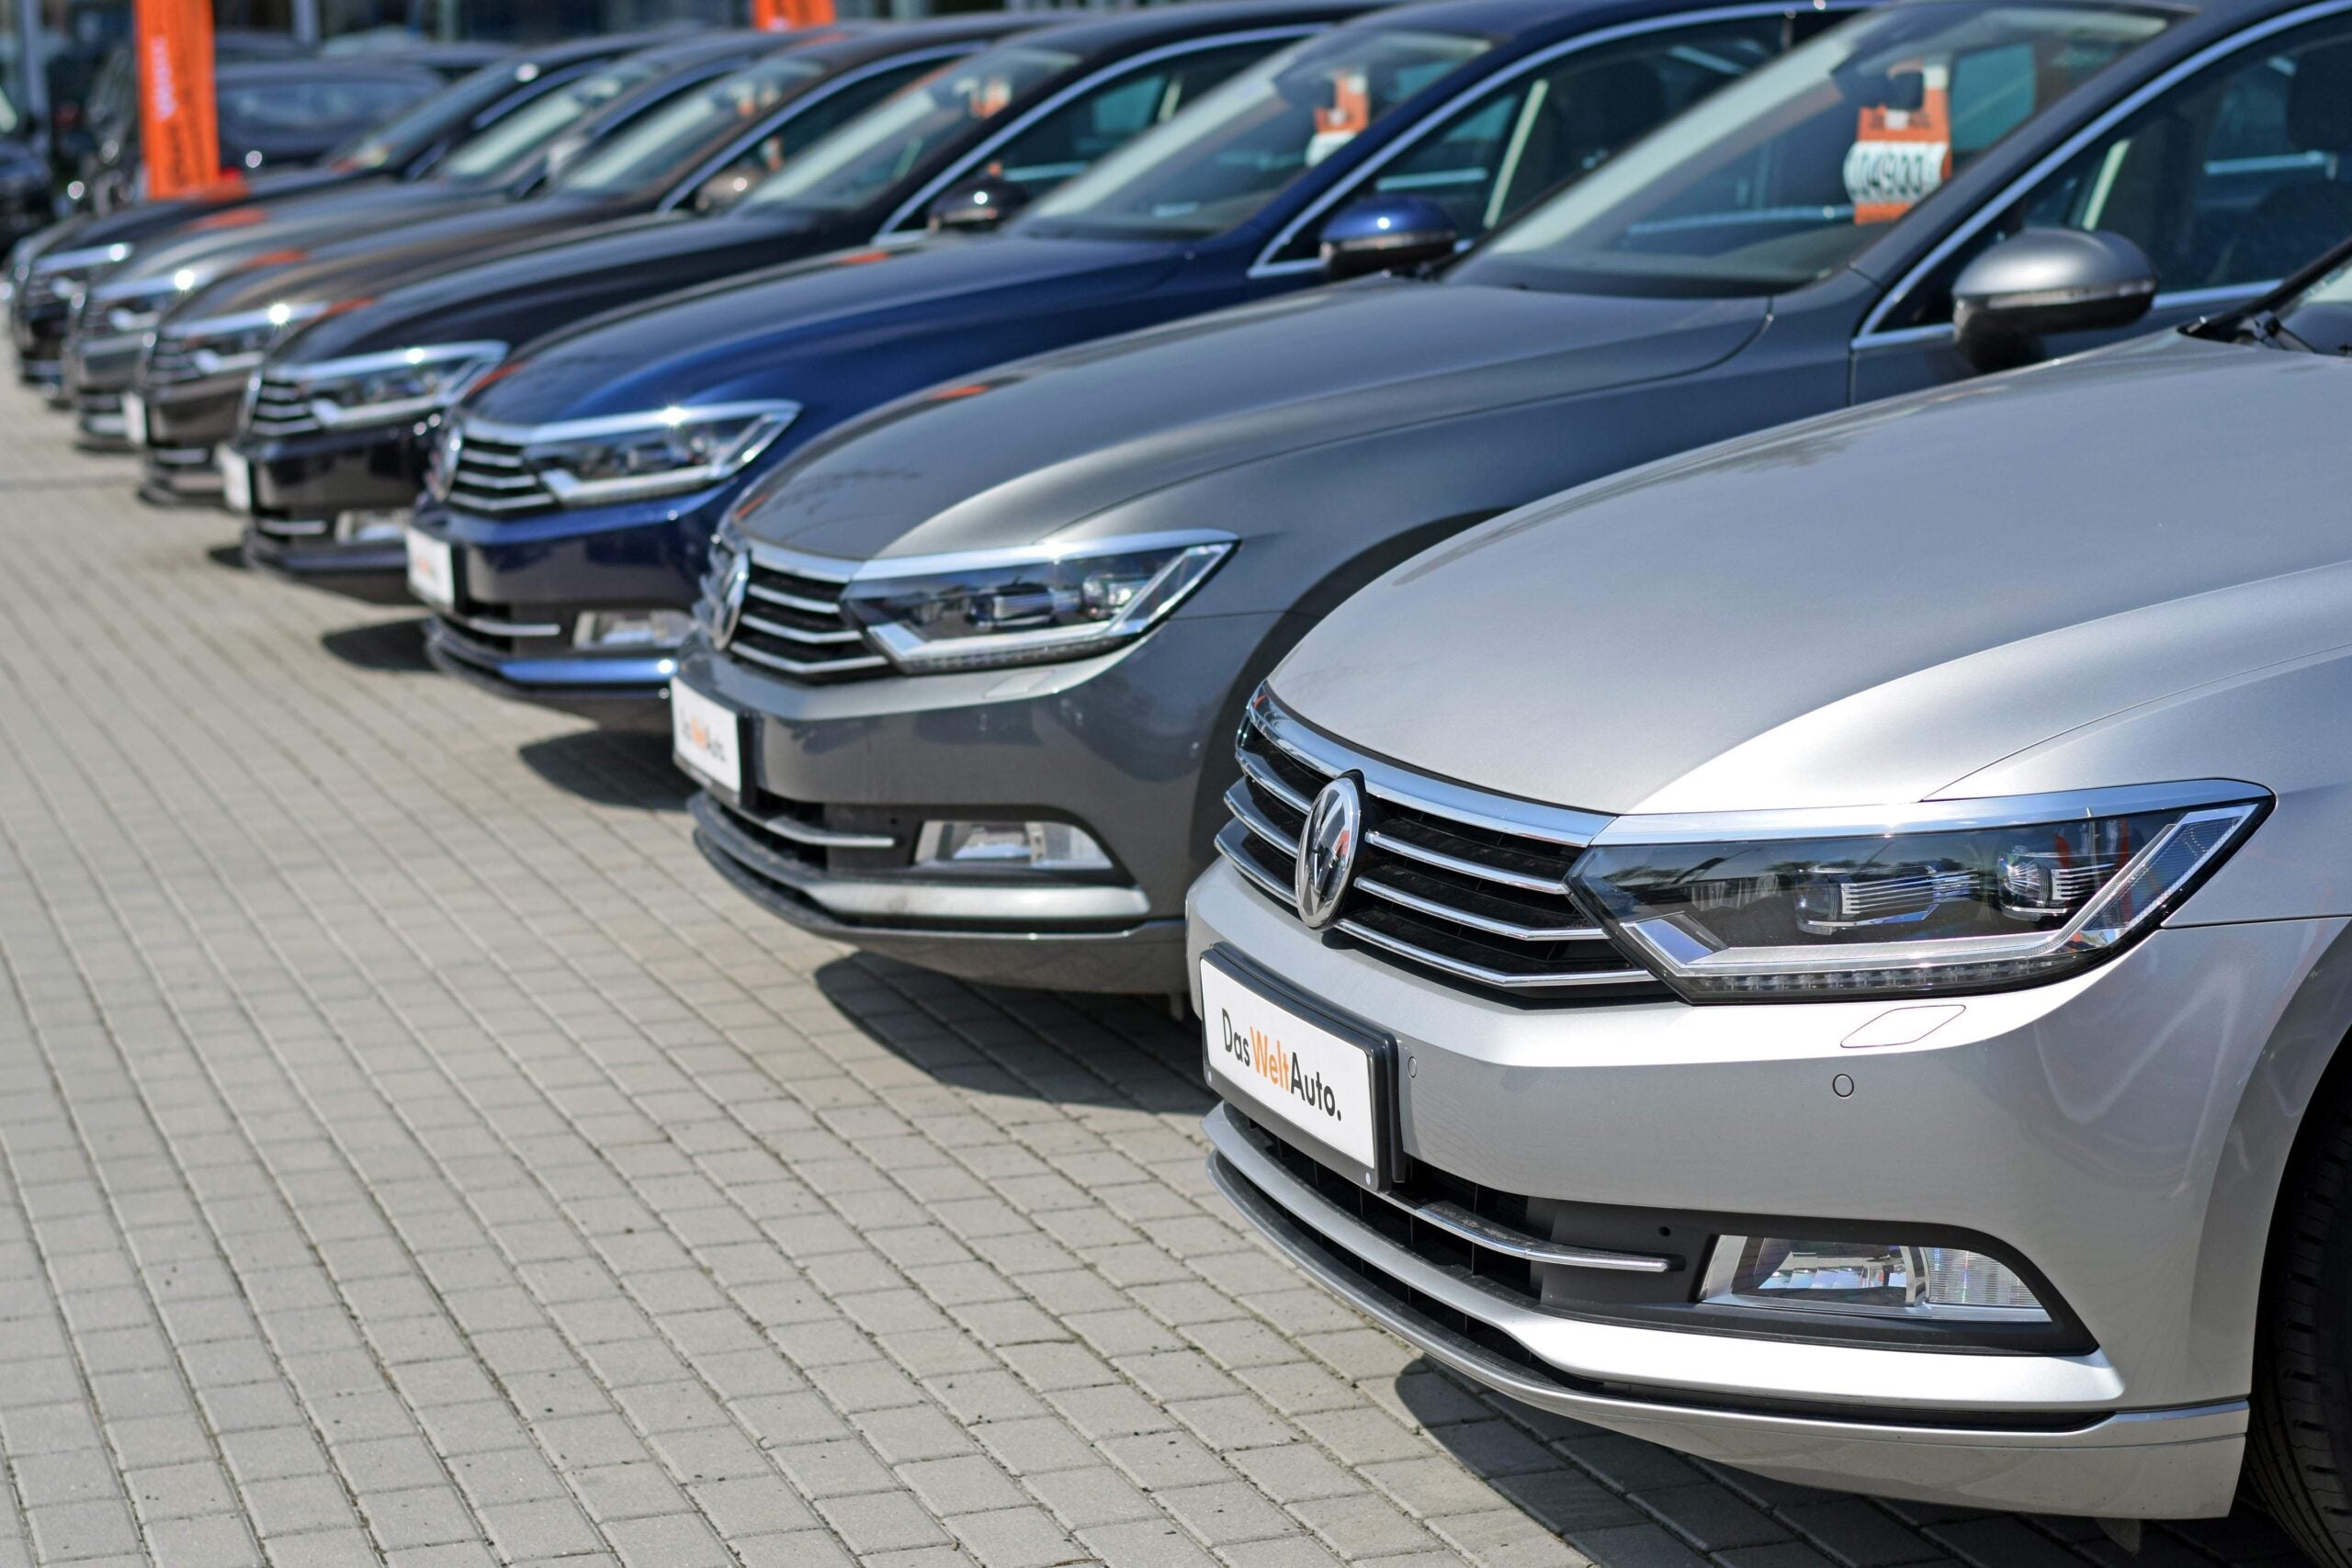 Fleetcheck: status of company car is changing